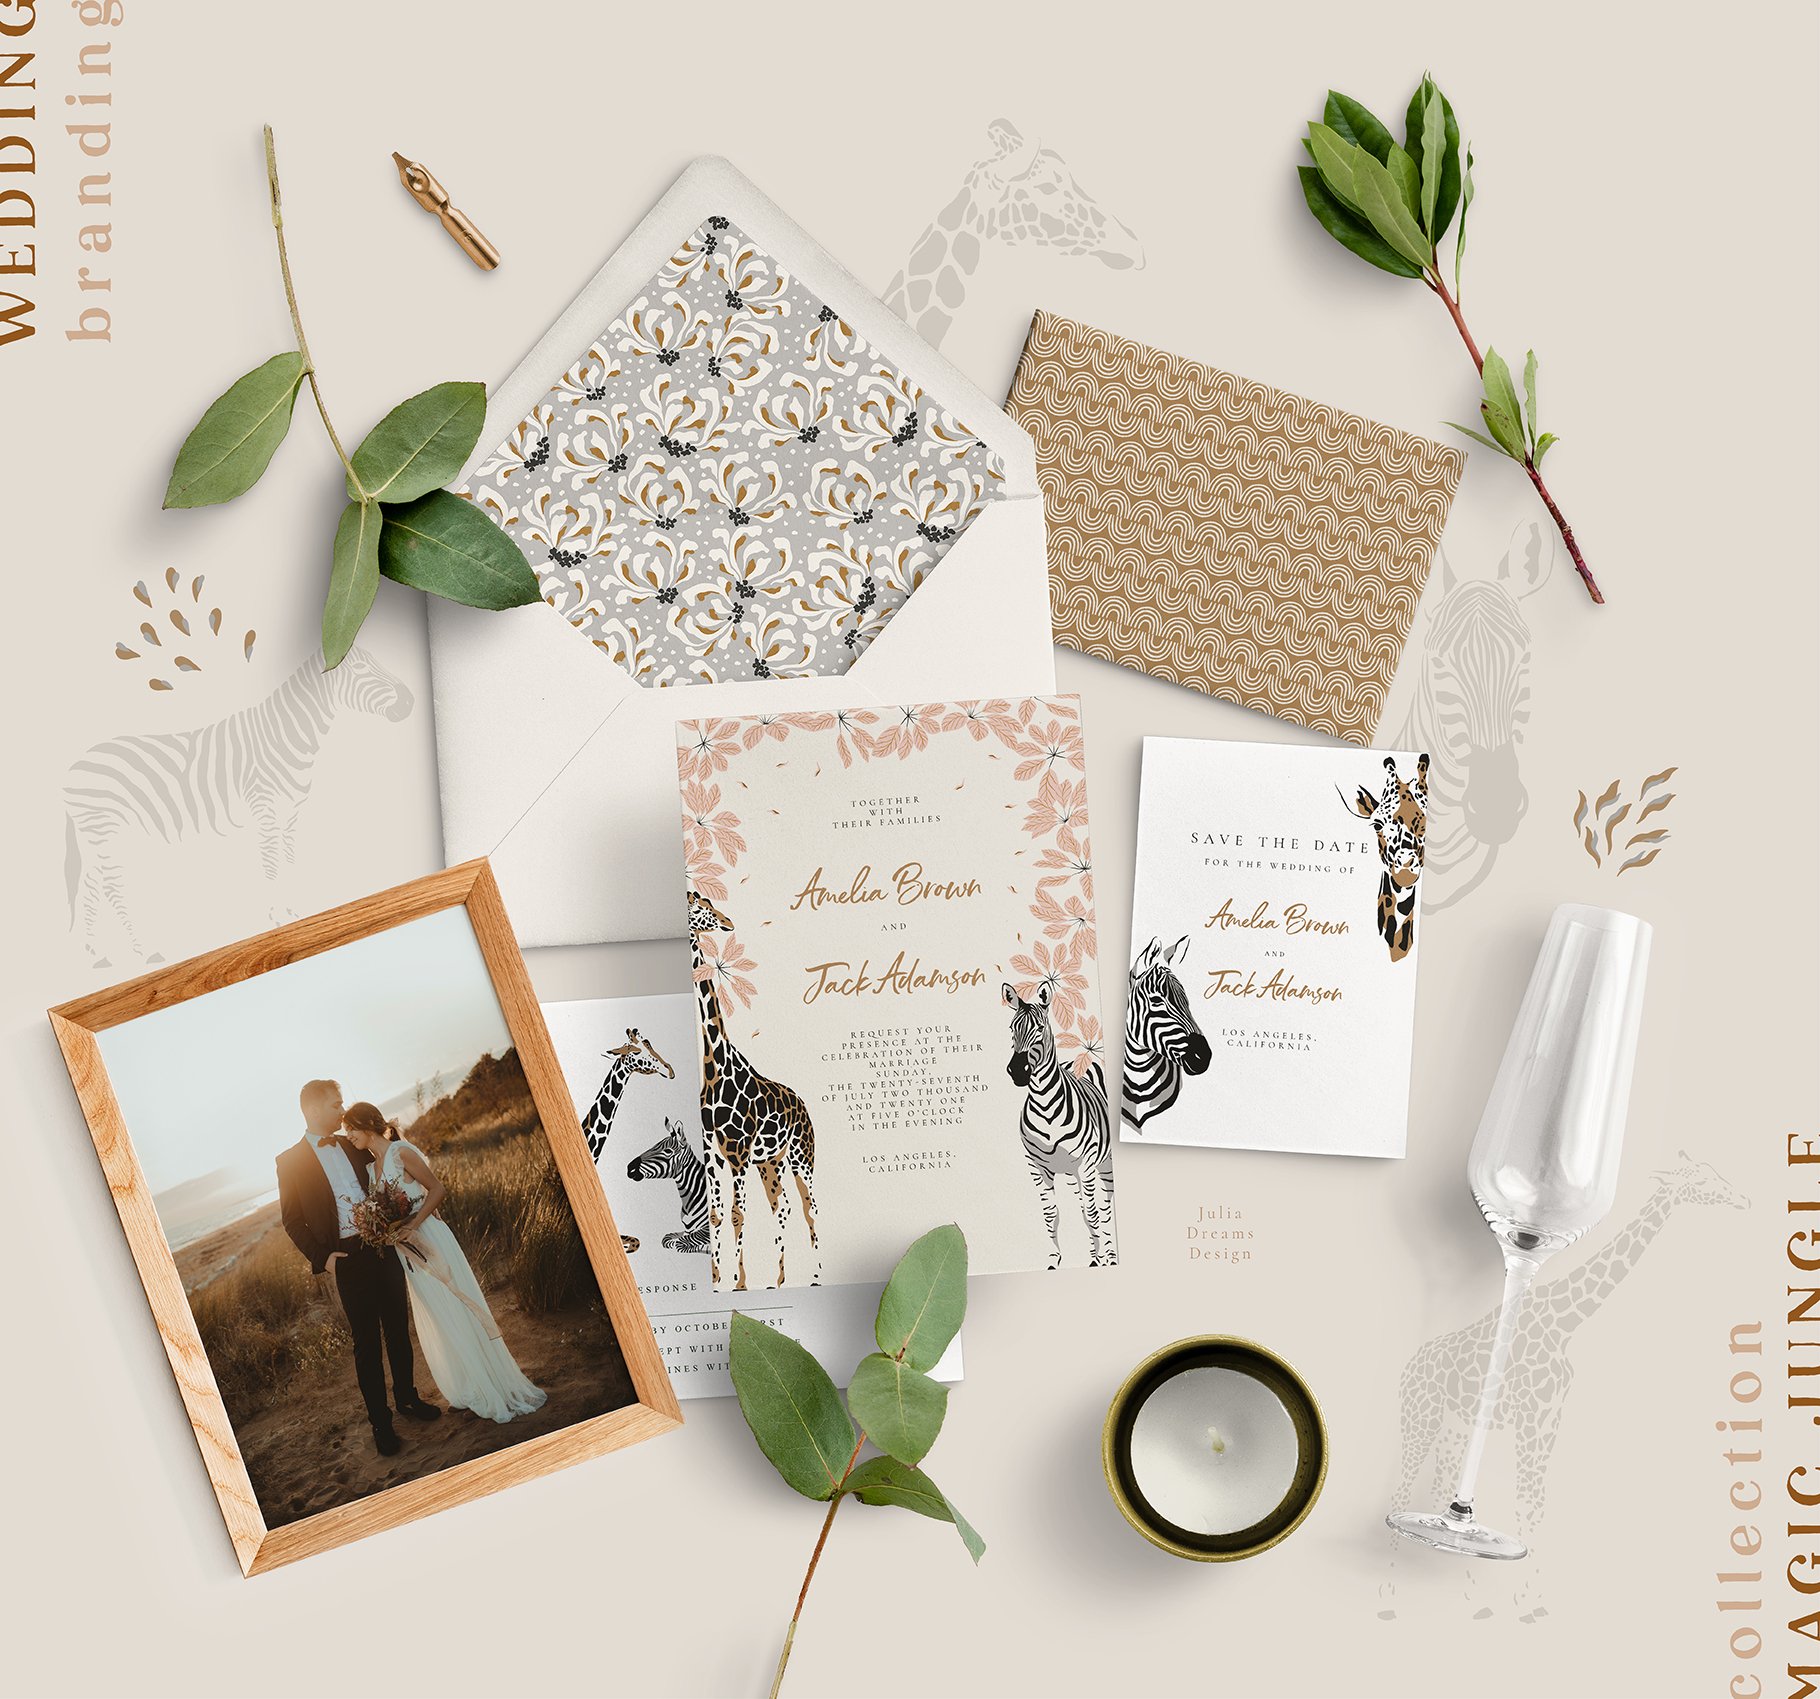 Vintage composition with tropical postcards, invitations and photos.